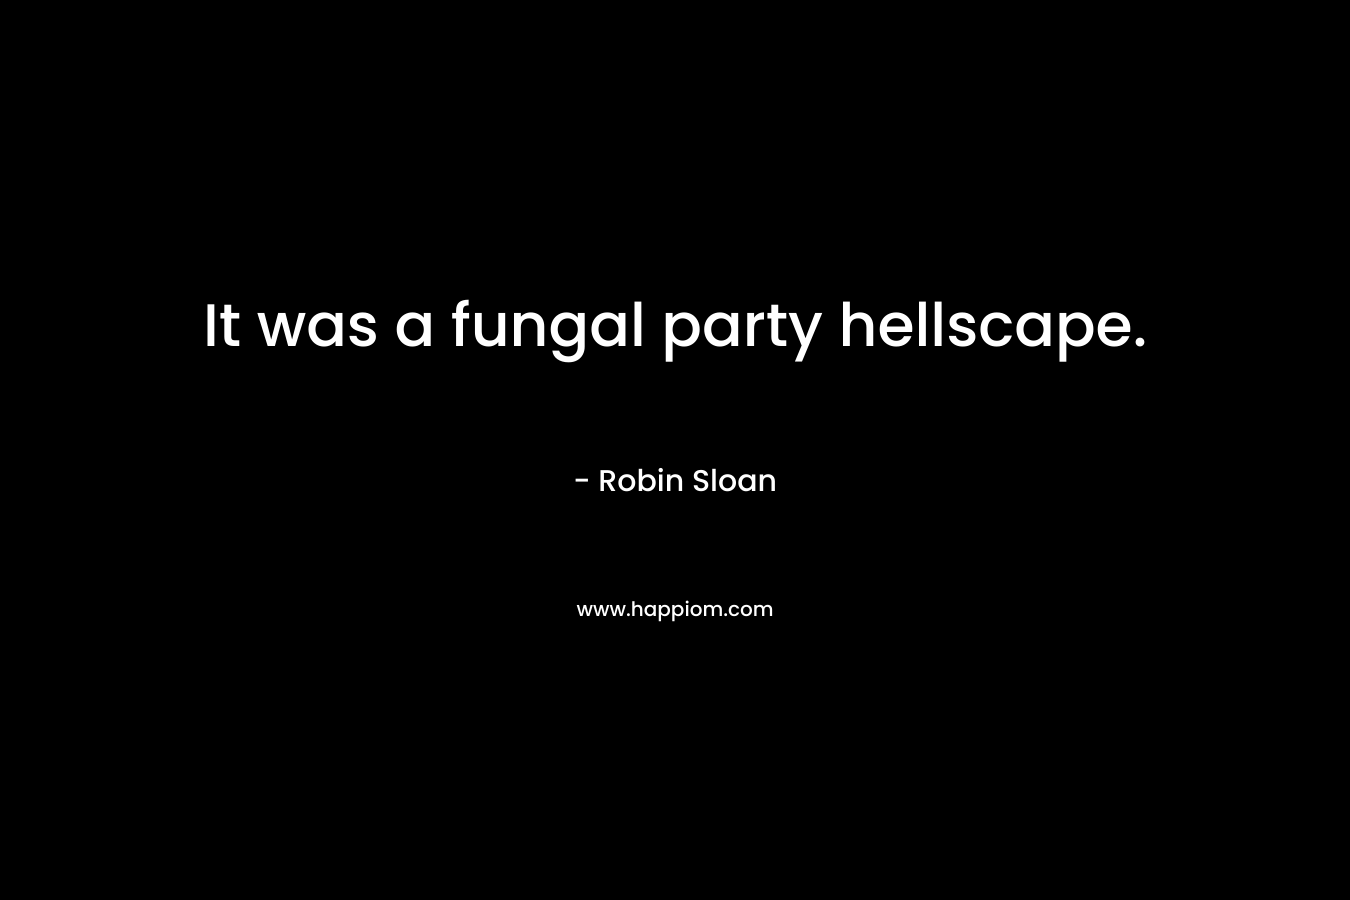 It was a fungal party hellscape.